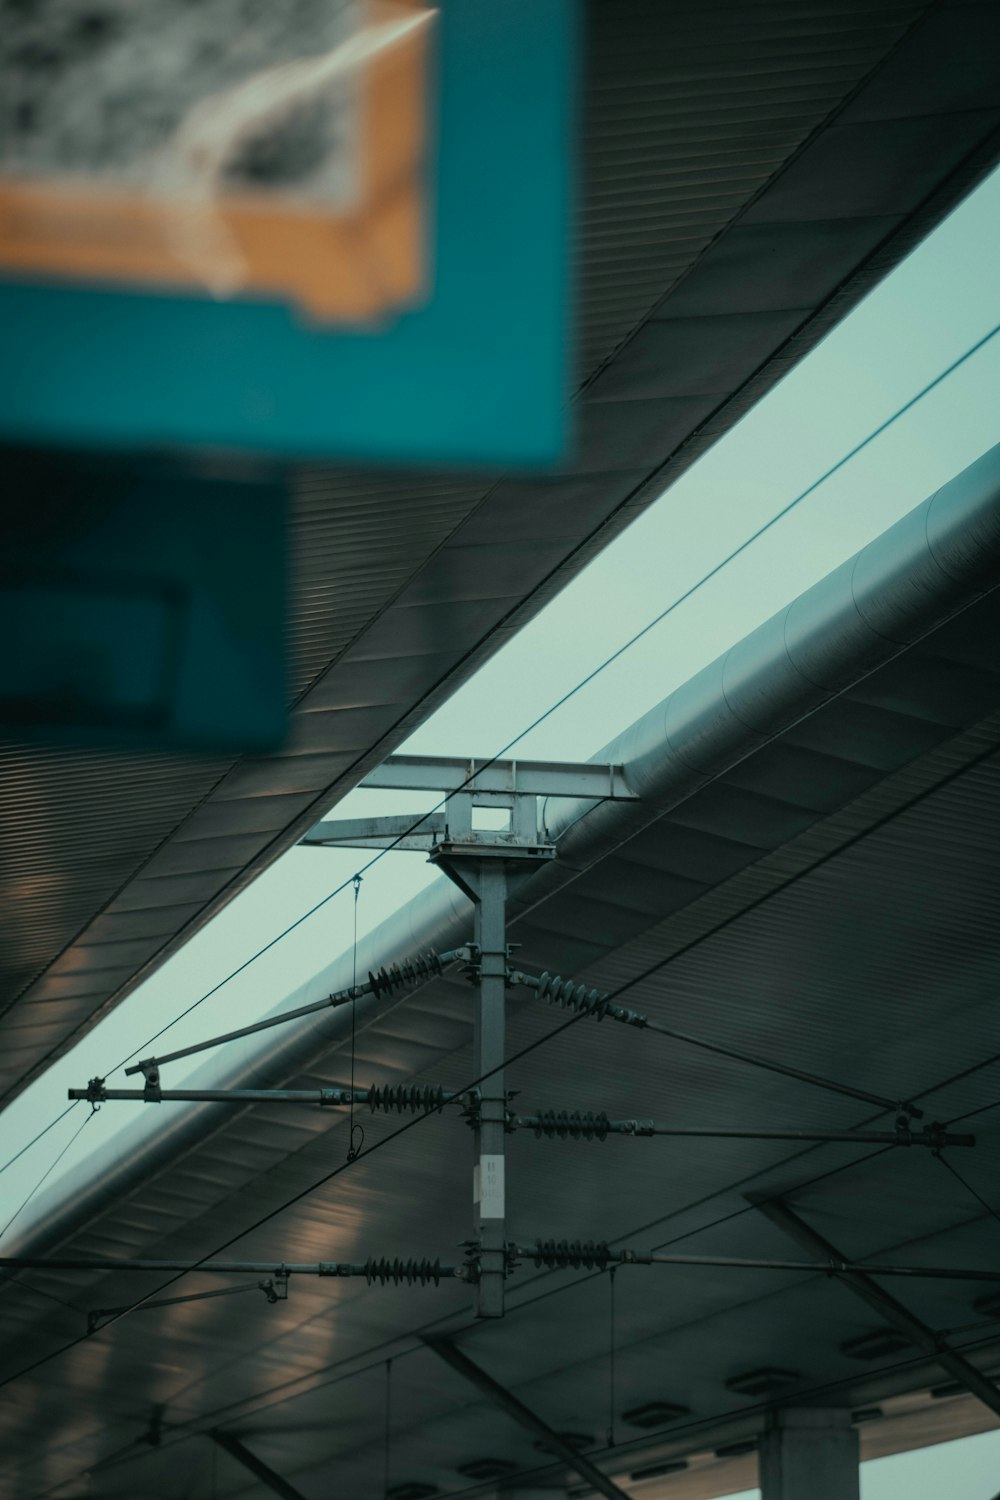 a close up of a train station ceiling with wires